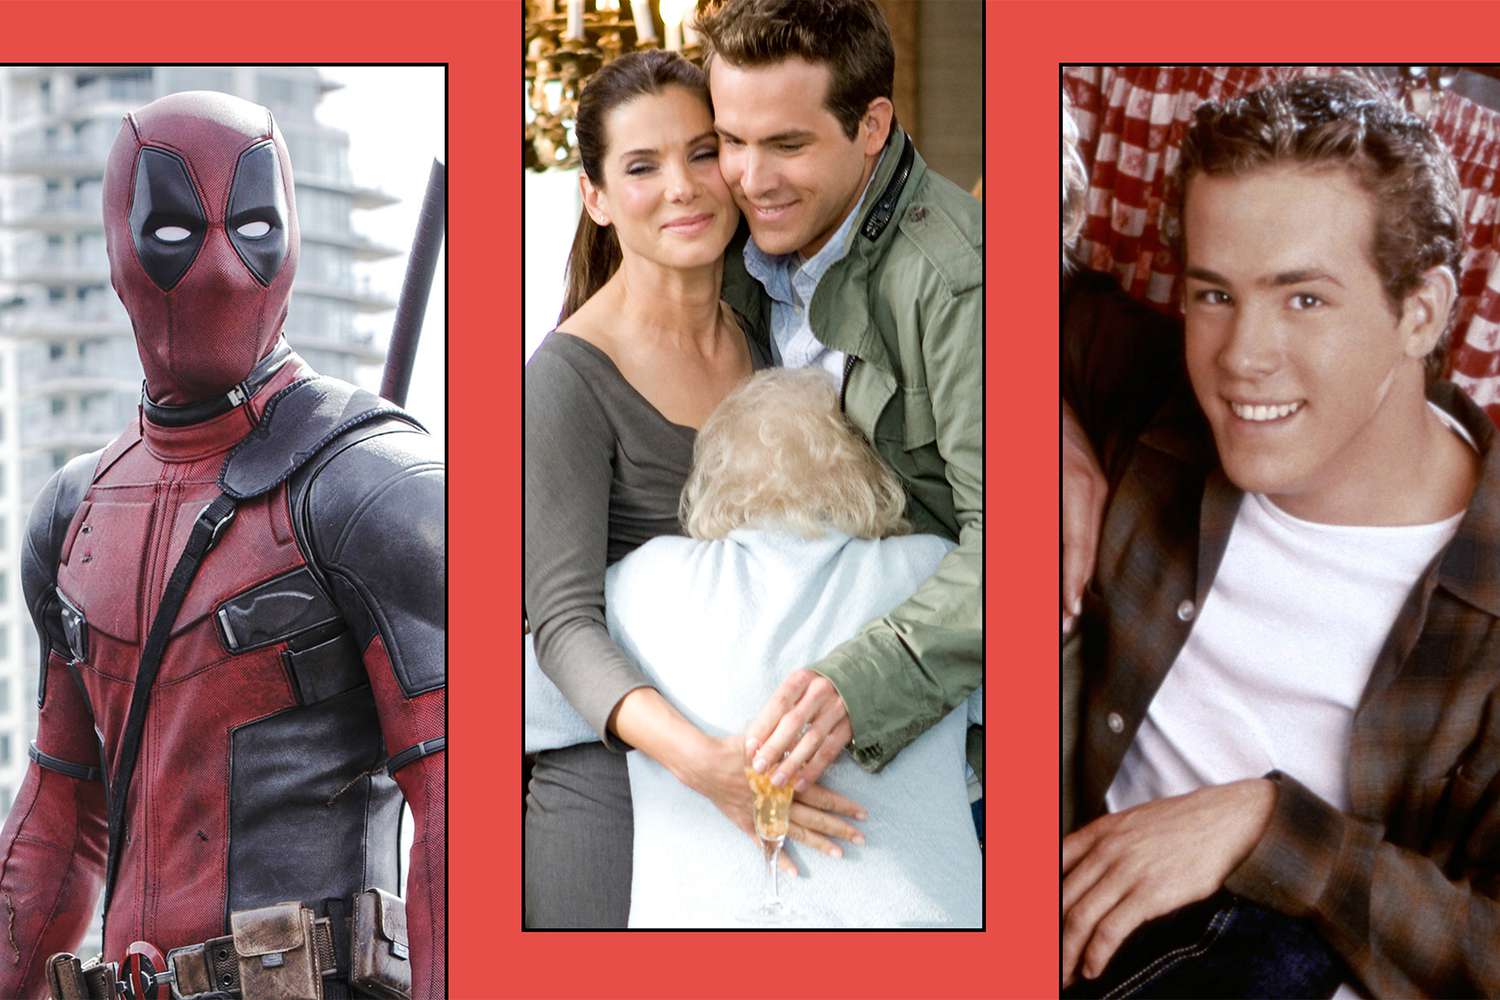 The 15 best Ryan Reynolds movies and TV shows ranked, from ‘Deadpool’ to ‘Definitely Maybe’